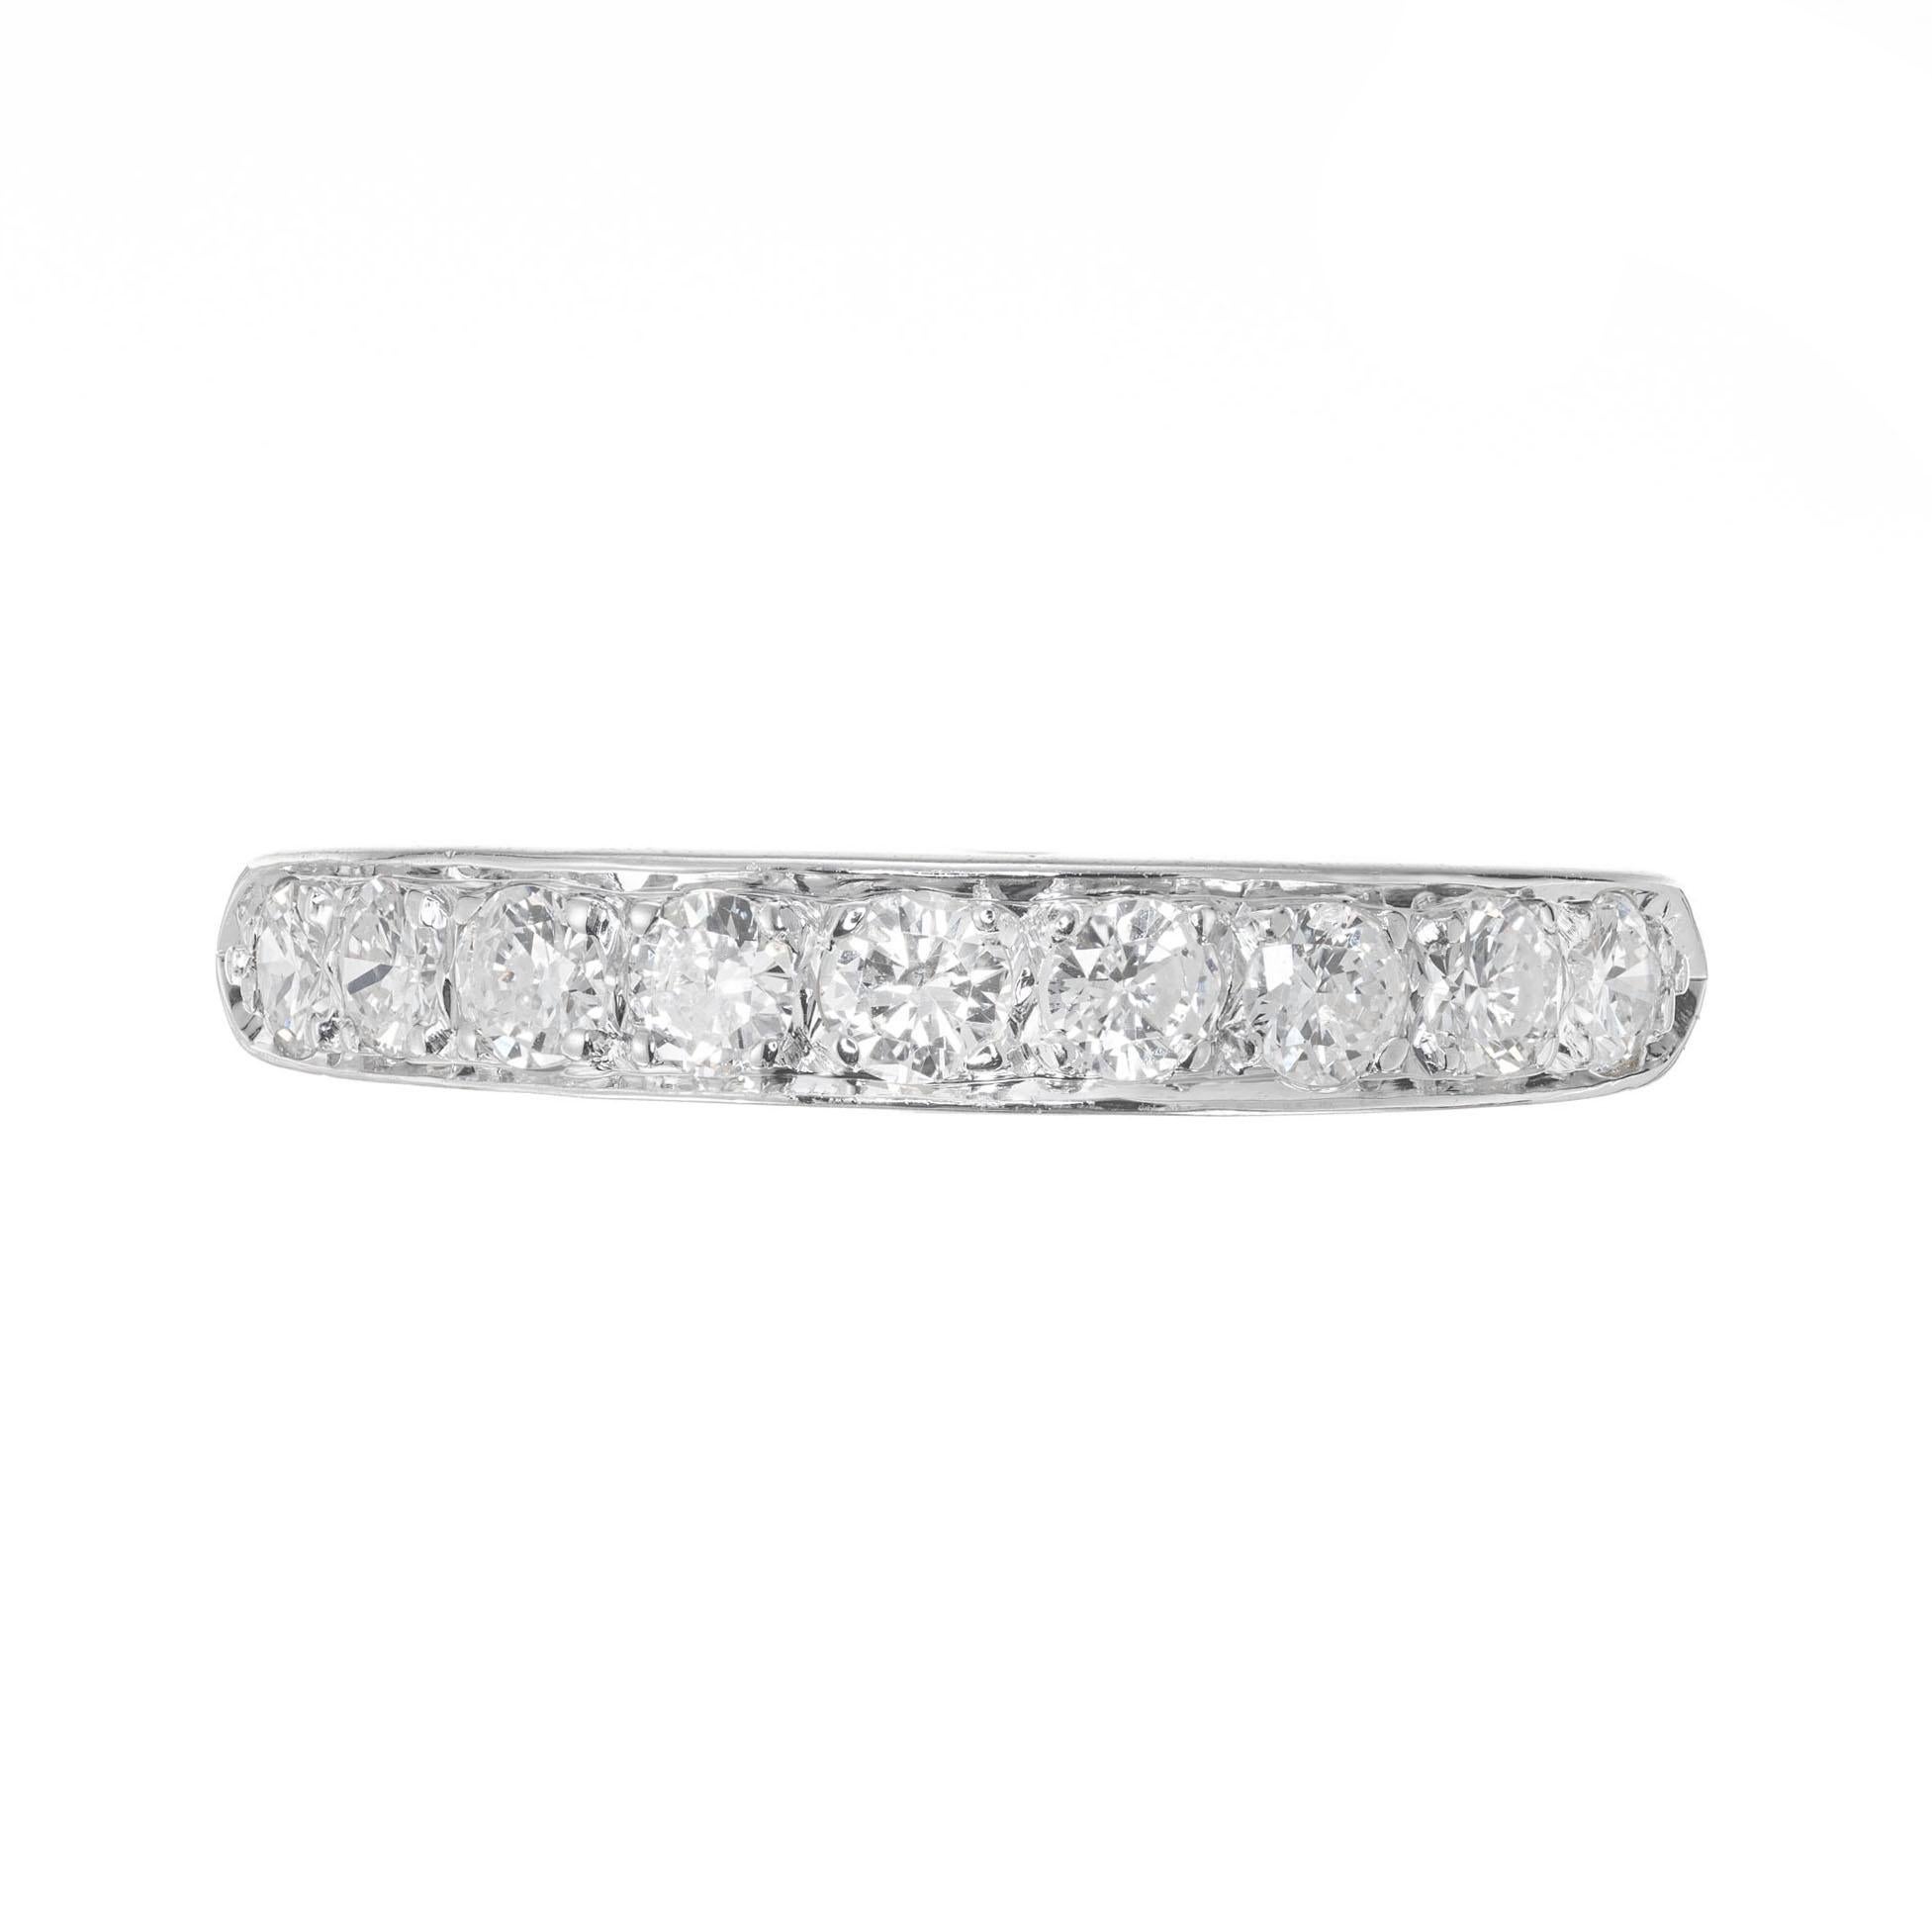 Mid-Century, Diamond wedding band. 9 brilliant cut diamonds bead set in a 14k white gold setting. Circa 1950's.

9 round brilliant cut diamonds, G SI approx. .54cts
Size 6 and sizable
14k white gold 
Stamped: 14k
2.8 grams
Width at top: 3.8mm
Height